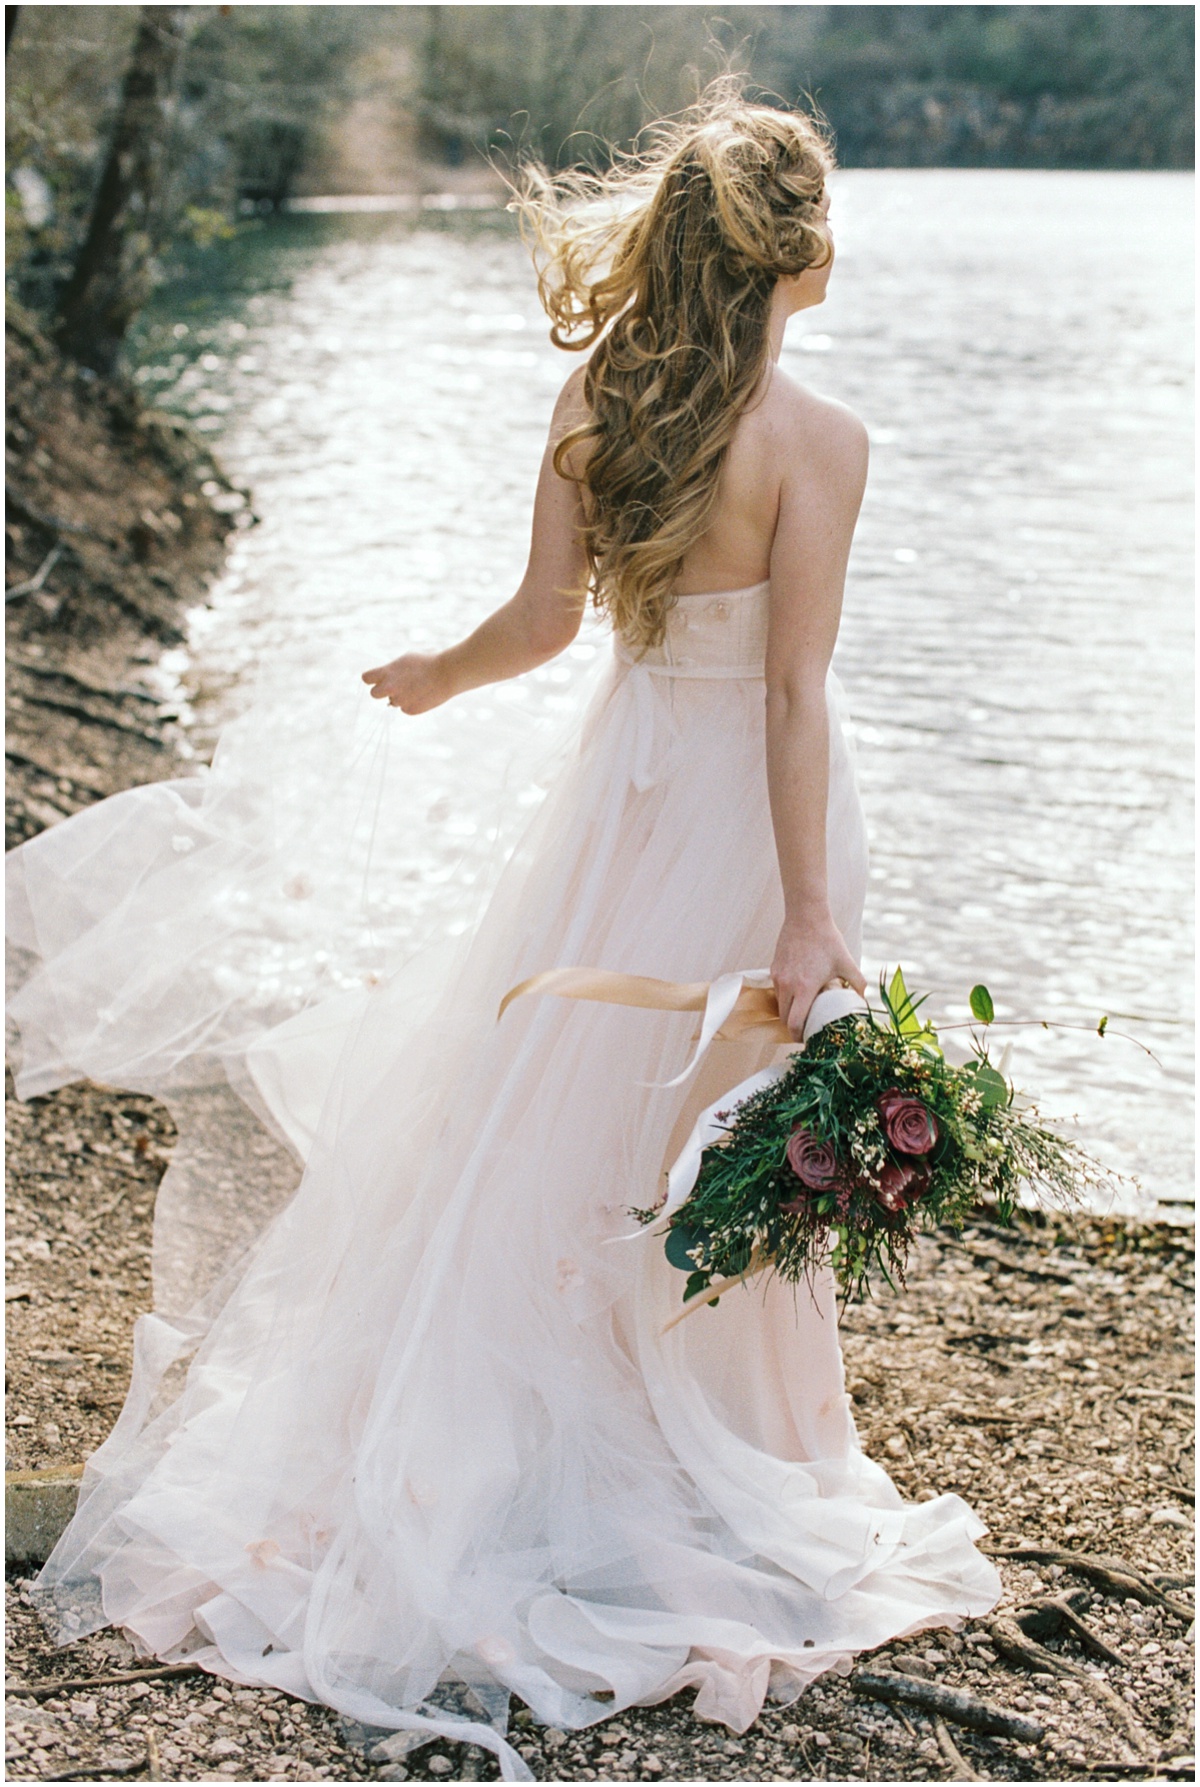 Abigail_Malone_Film_Wedding_Photography_KNoxville_TN_Blush_Dress_Outdoor_Windy_Pink_and_Green_Wedding_0041.jpg